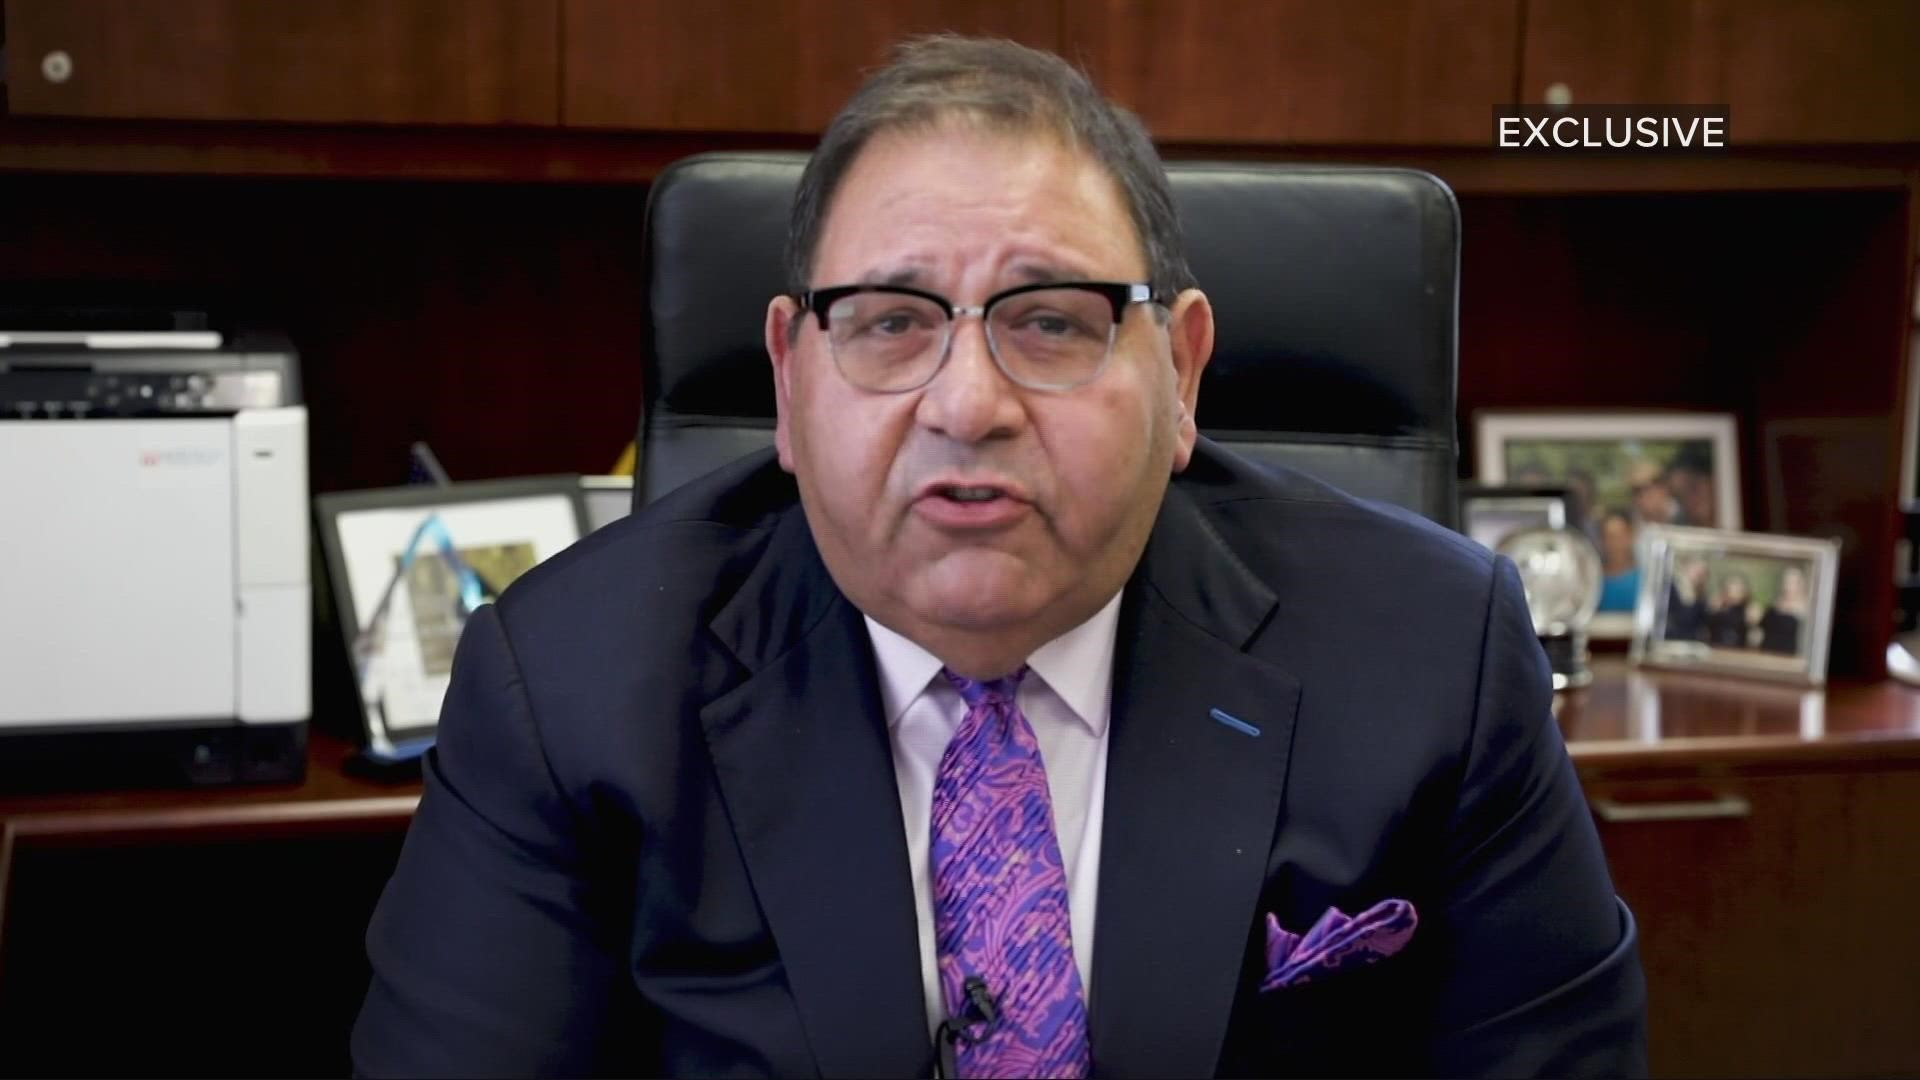 The hospital's board of trustees claims Boutros failed to disclose more than $1.9 million in bonuses he gave to himself over a four-year period.